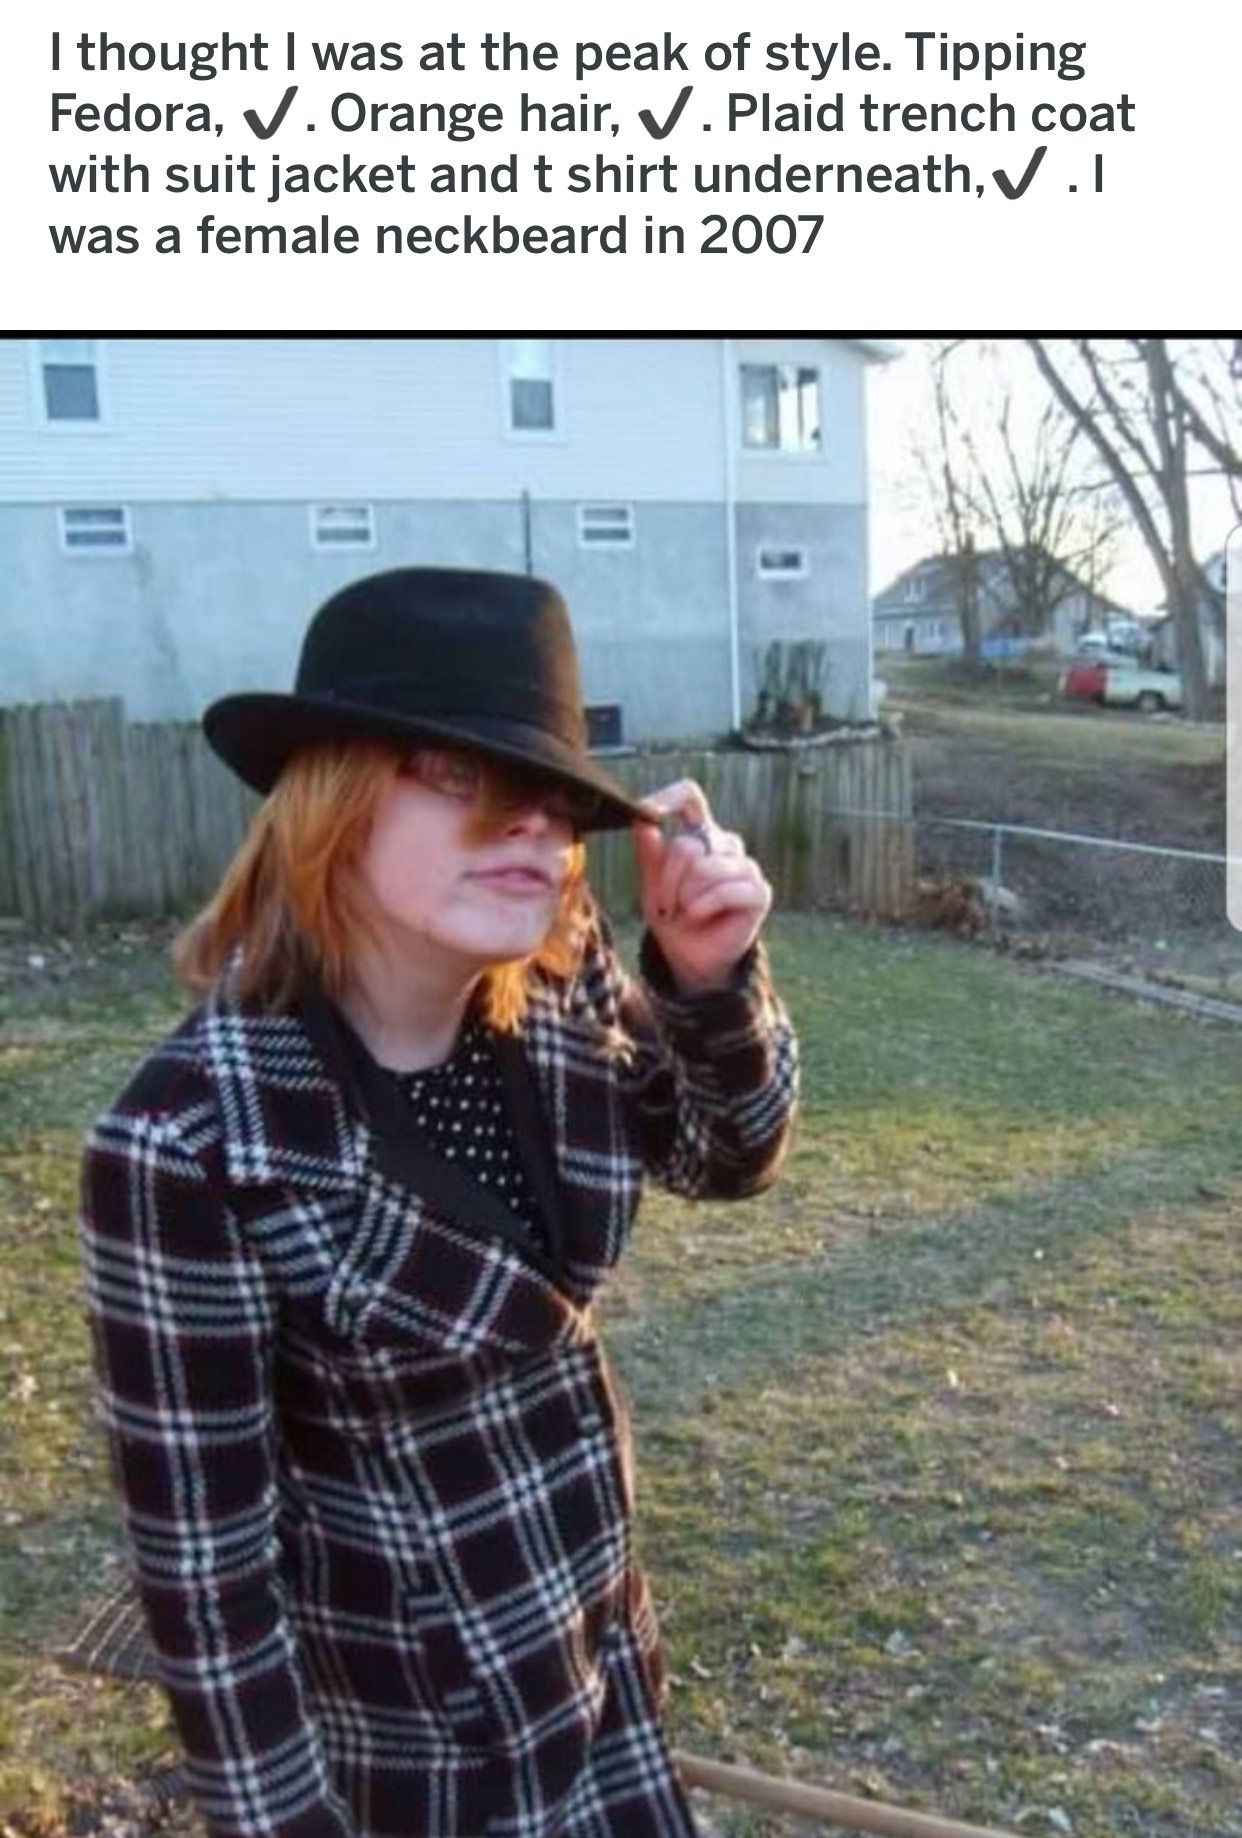 plaid - I thought I was at the peak of style. Tipping Fedora, V. Orange hair, V.Plaid trench coat with suit jacket and t shirt underneath, V I was a female neckbeard in 2007